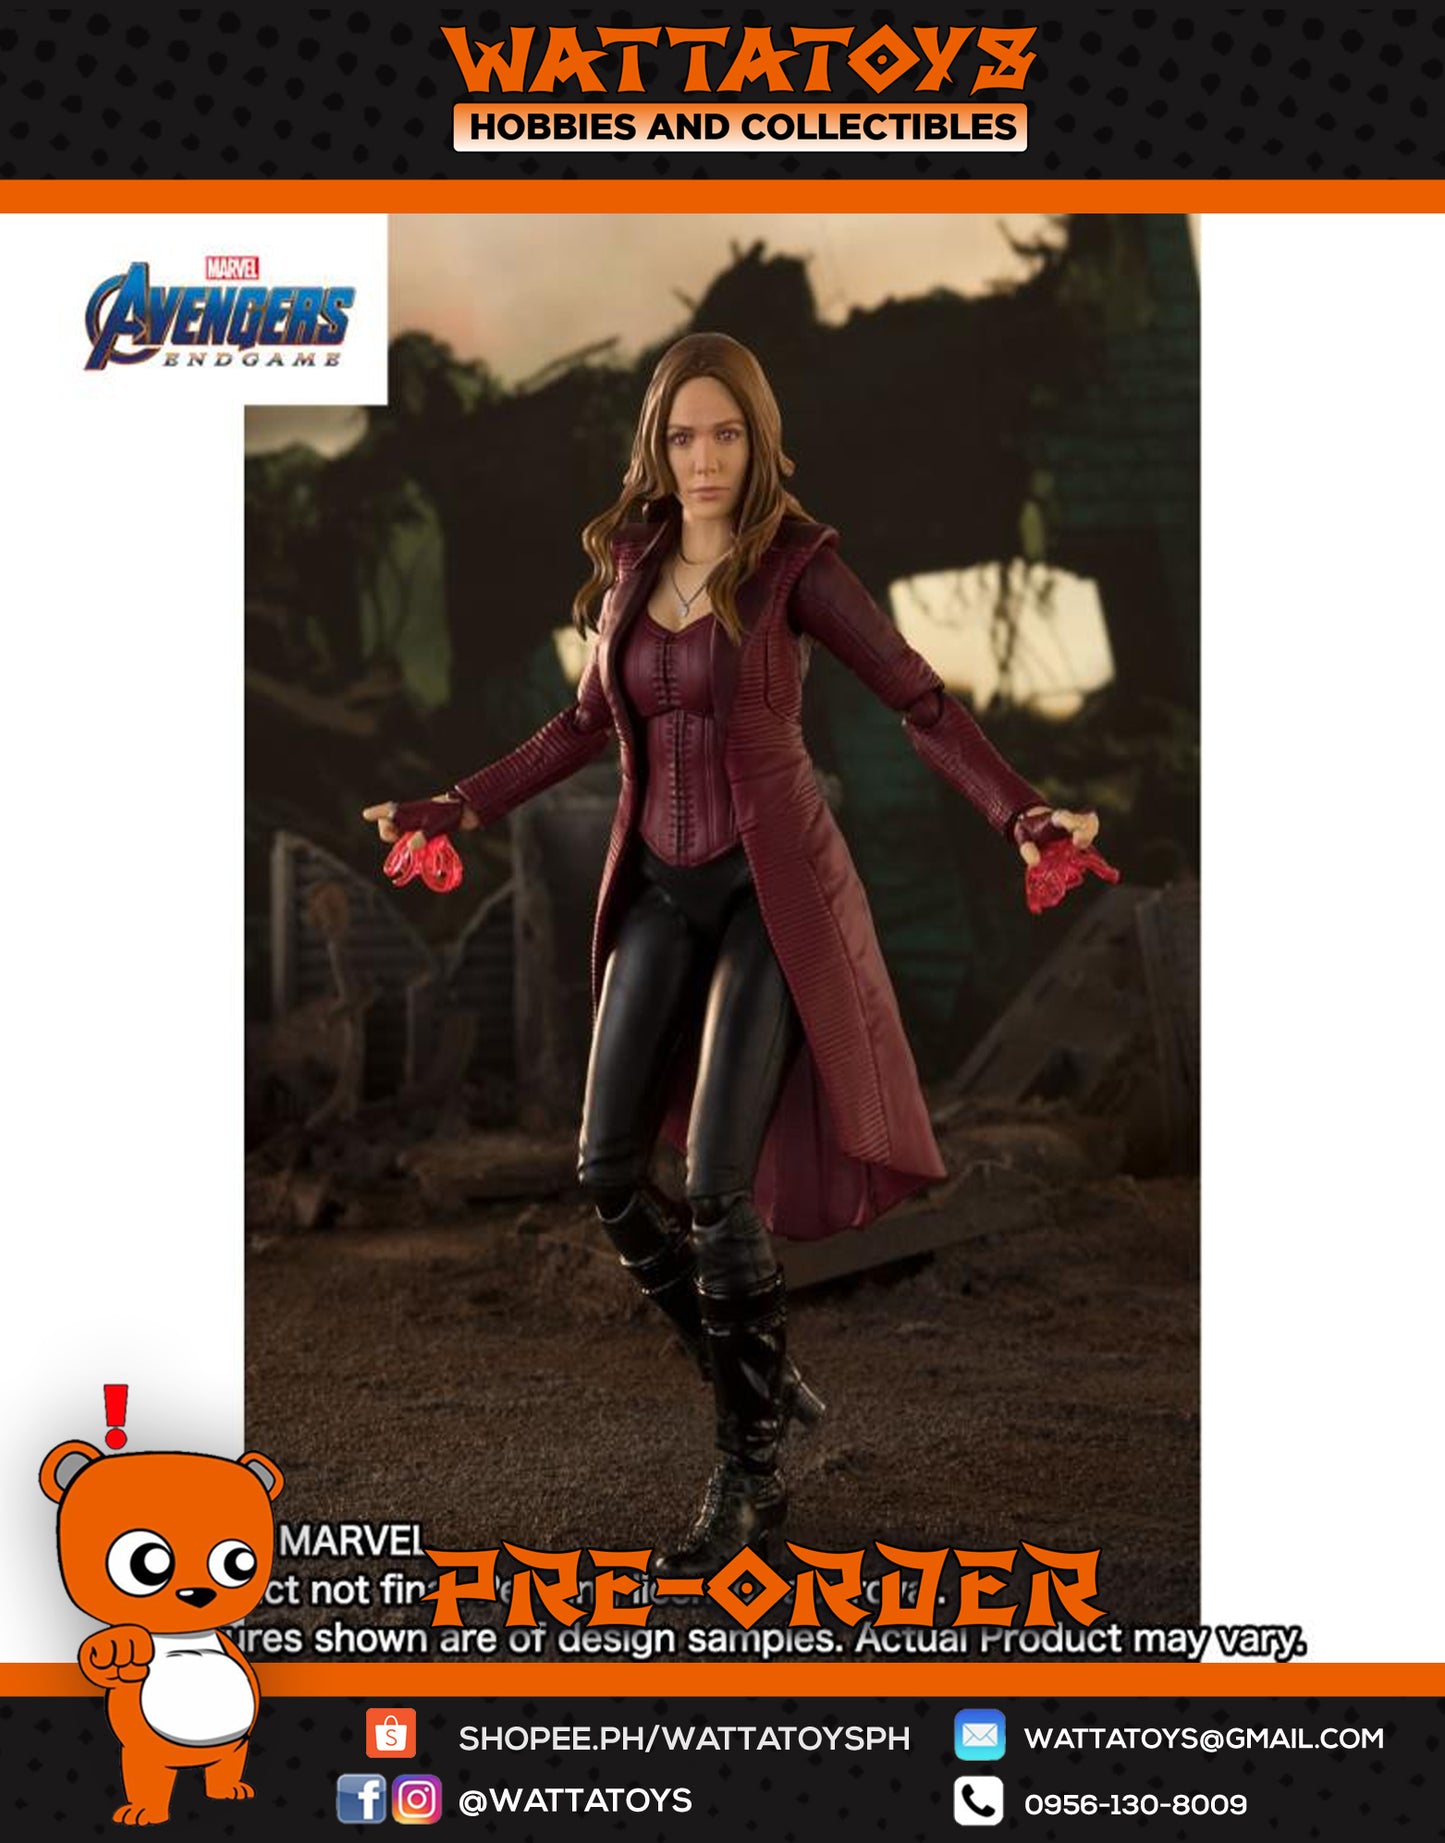 PRE ORDER P-BANDAI S.H.Figuarts Avengers: Endgame - Scarlet Witch